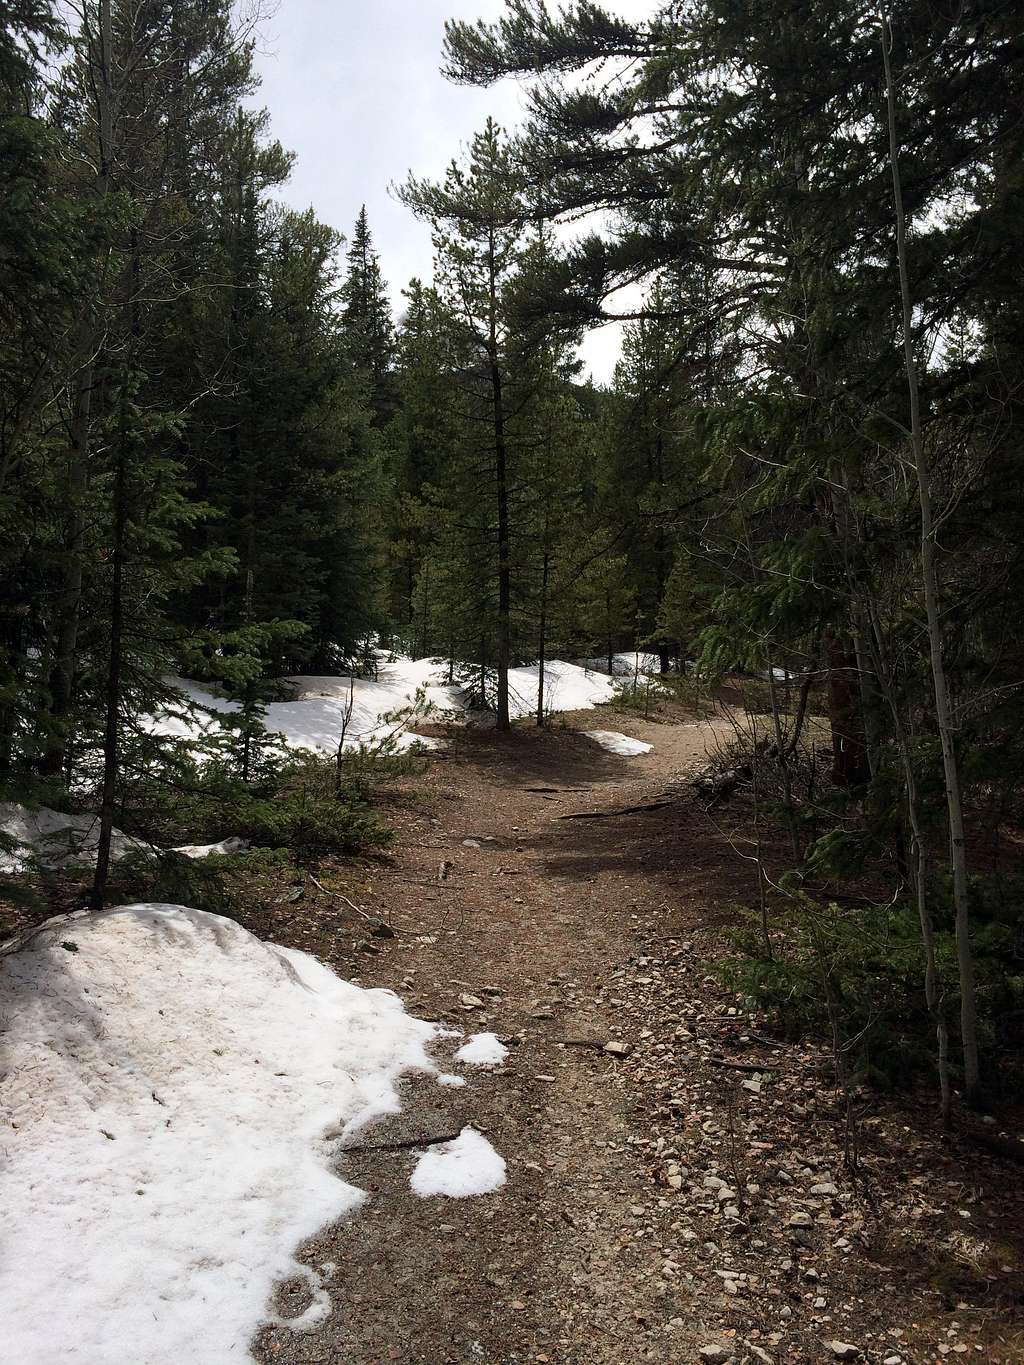 Snow Patches on Harvard's Trail